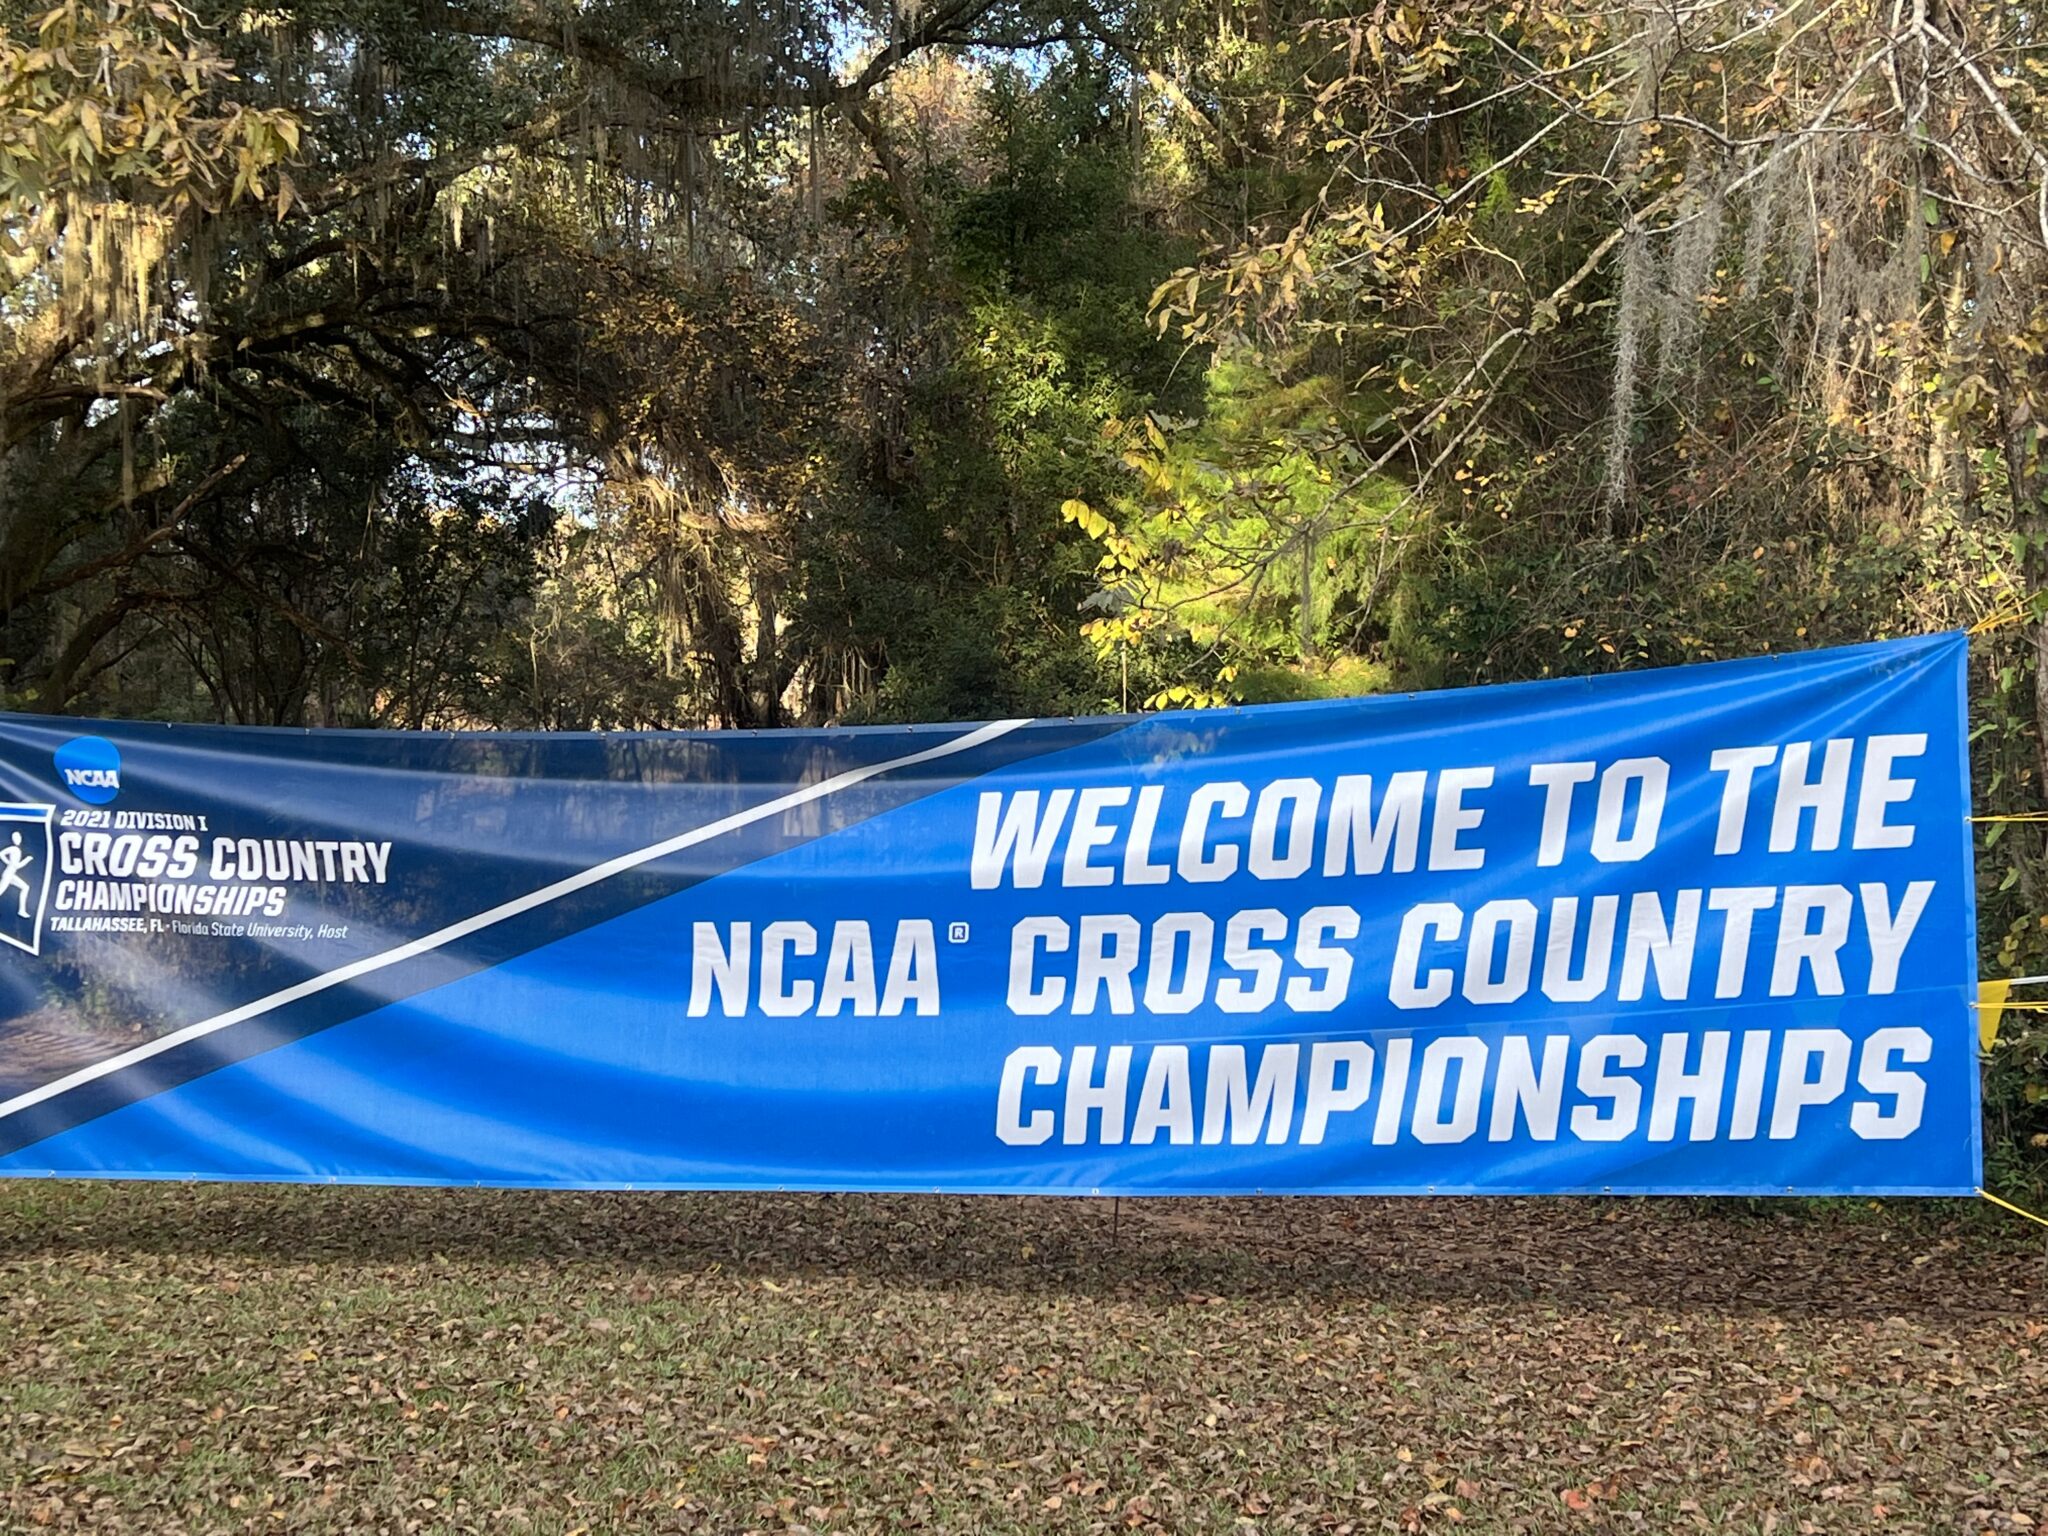 2021 NCAA Cross Country Television and Streaming Information